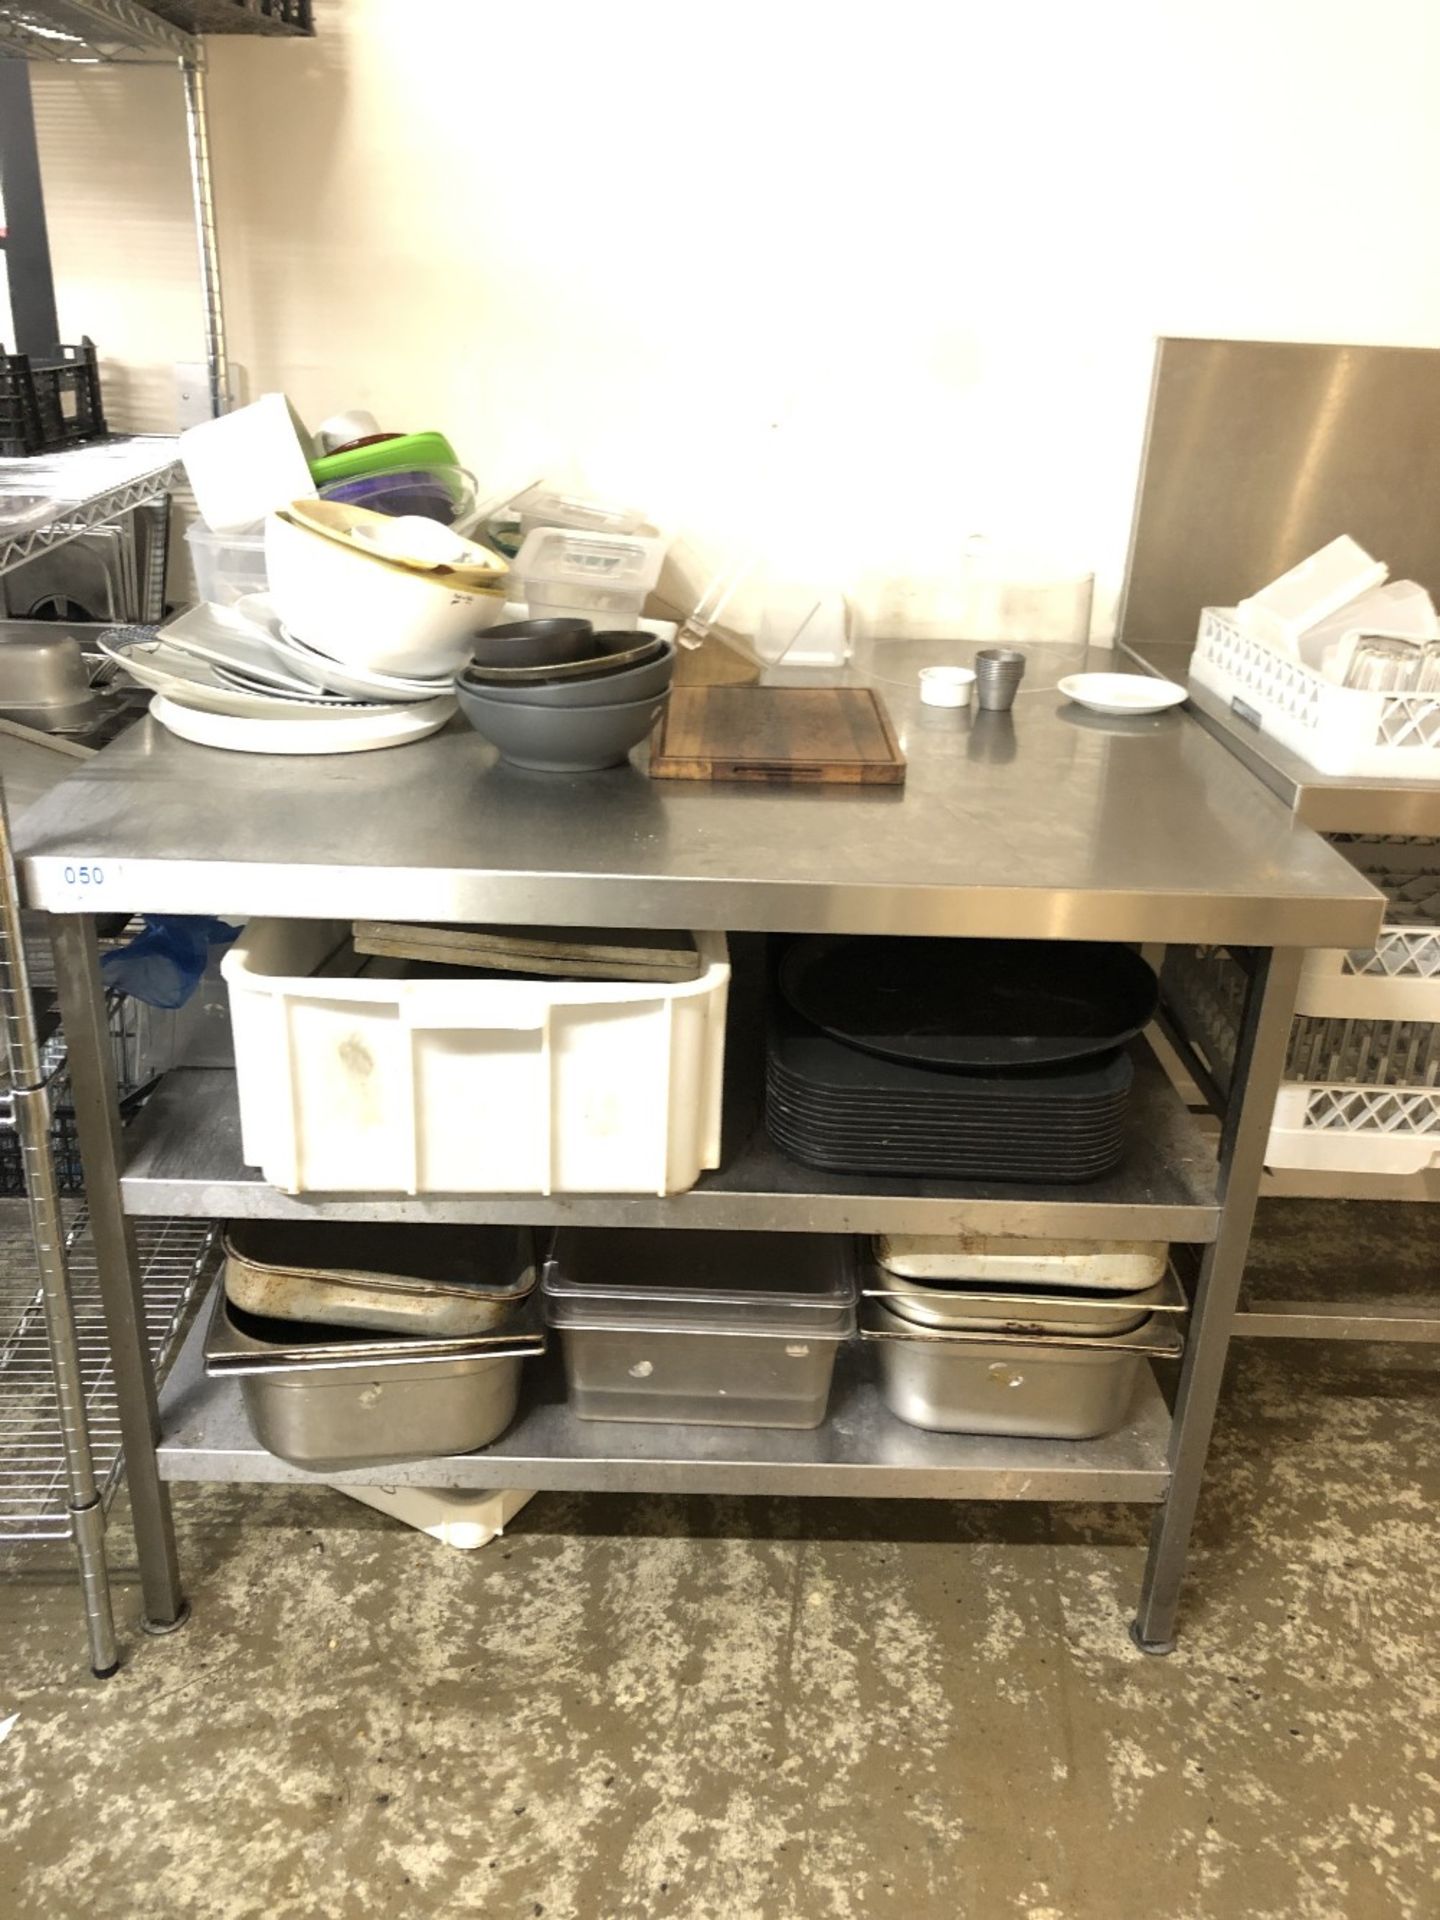 Stainless Steel Three Tier Preparation Table - Image 2 of 2